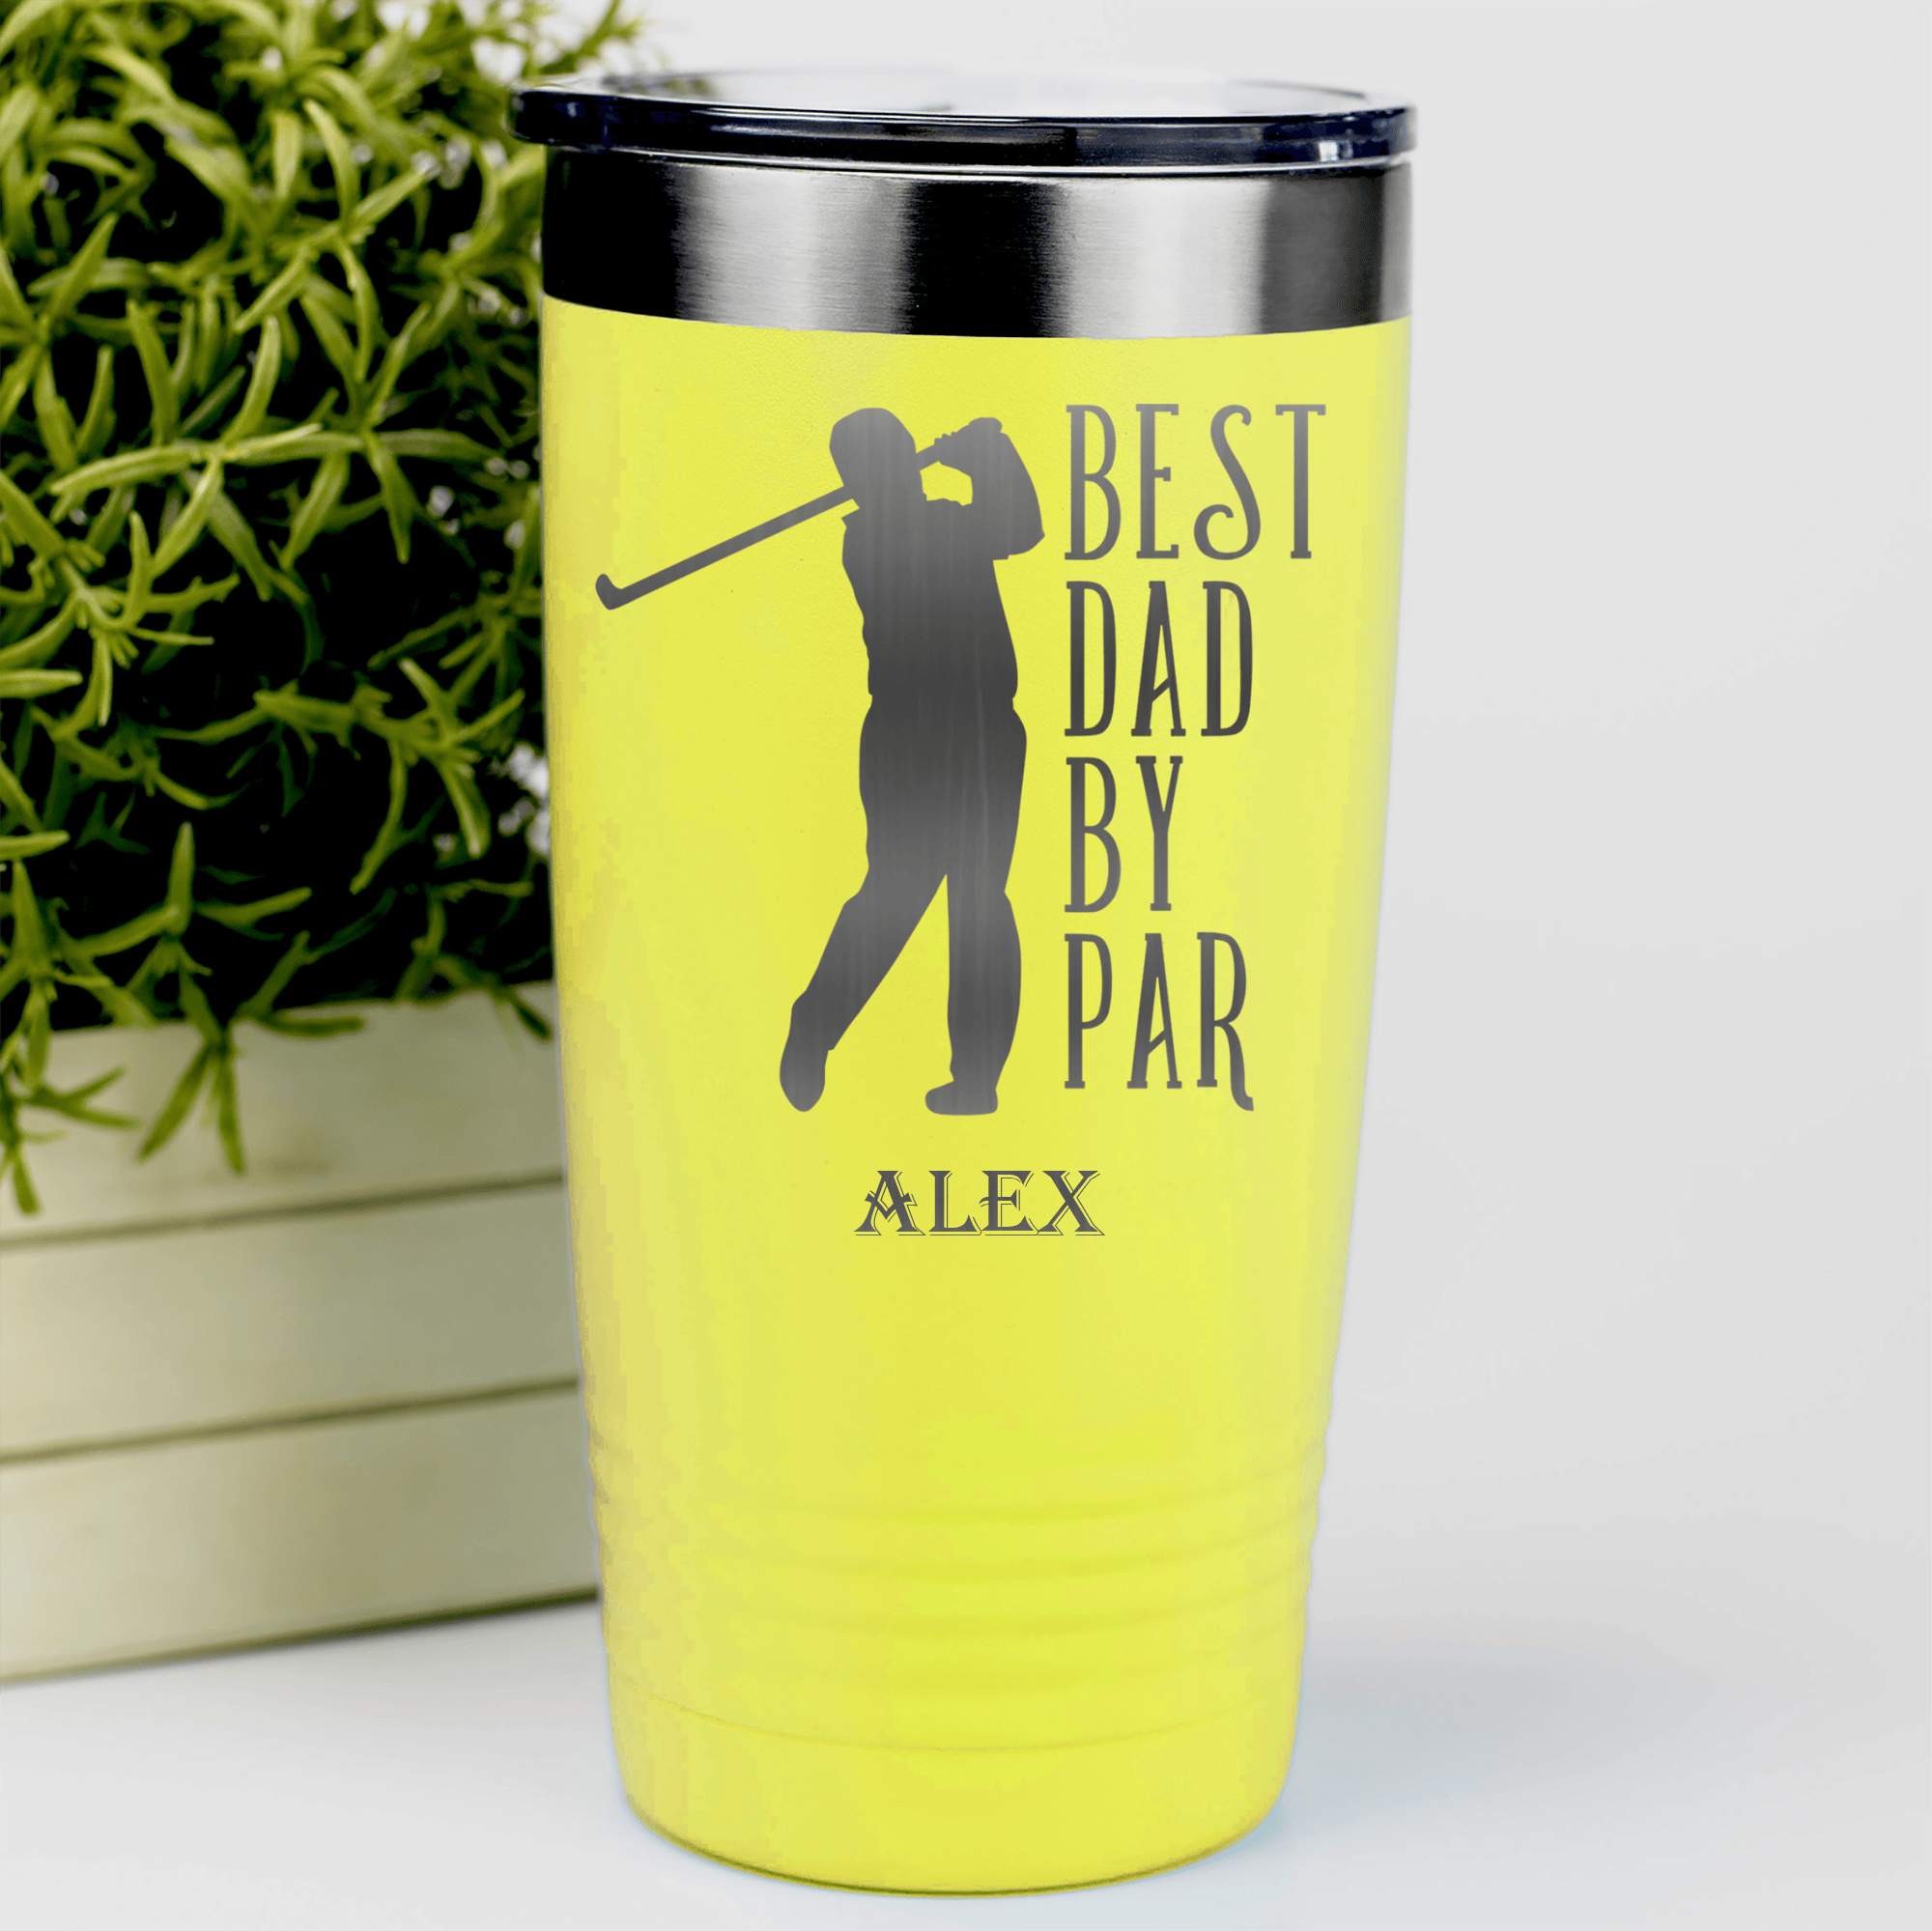 Yellow Golf Tumbler With Best Dad By Par Design